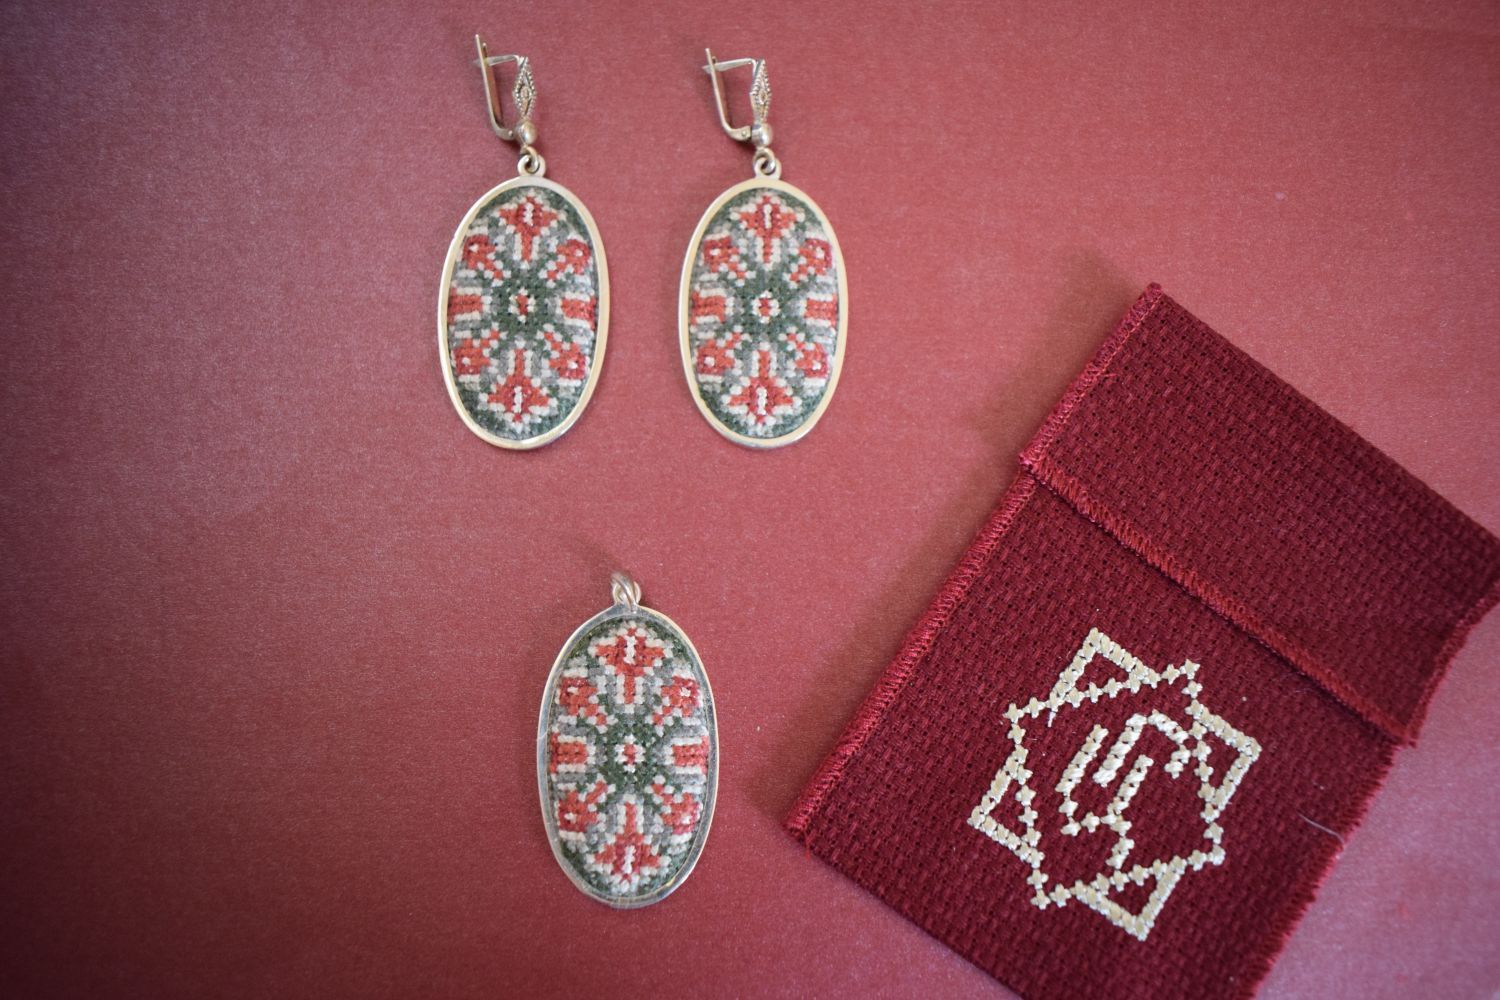 Embroidered Silver Pendant and Earrings with Armenian Ornaments